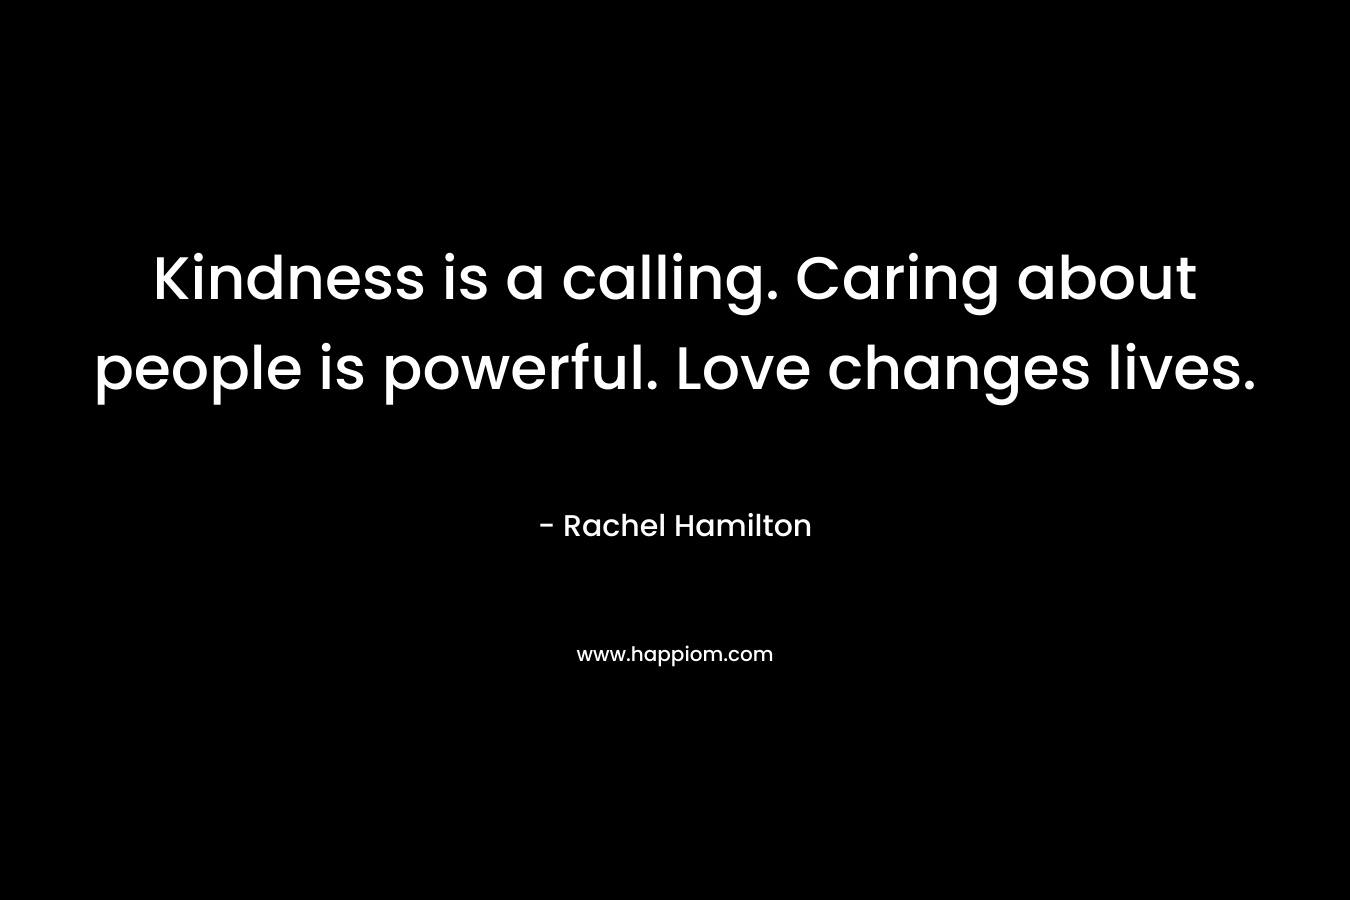 Kindness is a calling. Caring about people is powerful. Love changes lives.